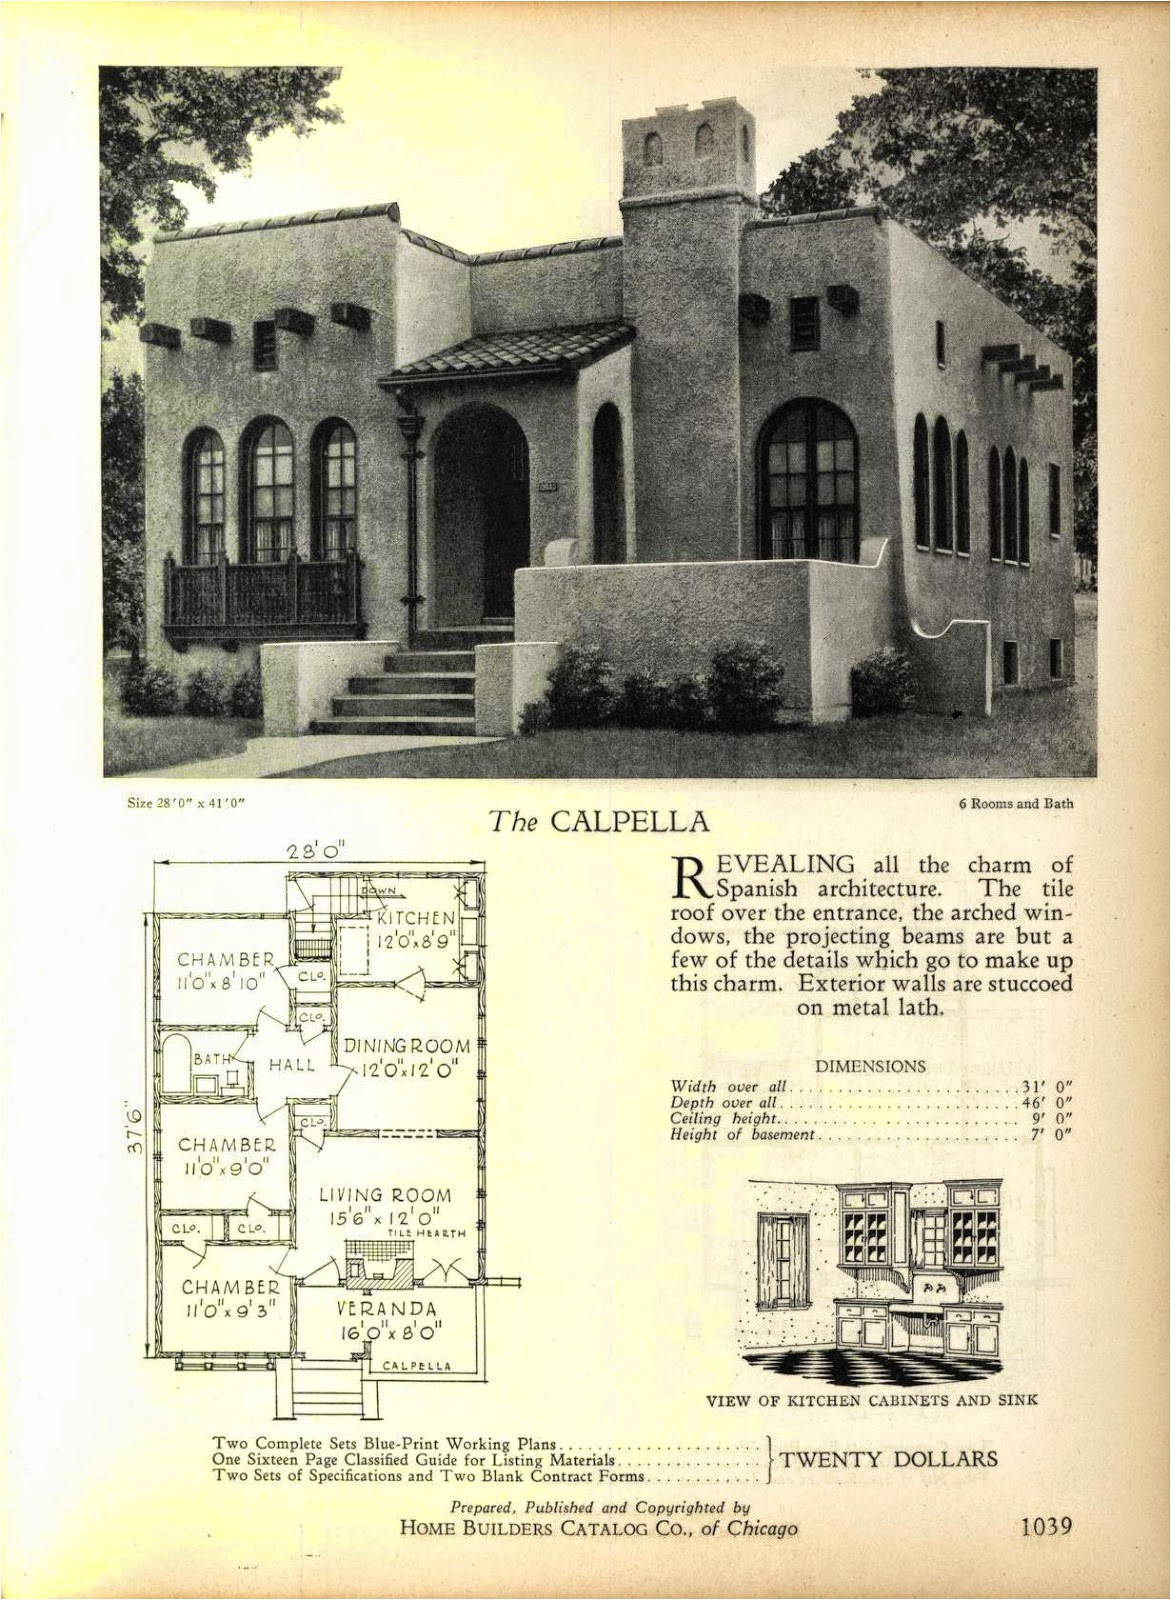 and even more art deco house plans